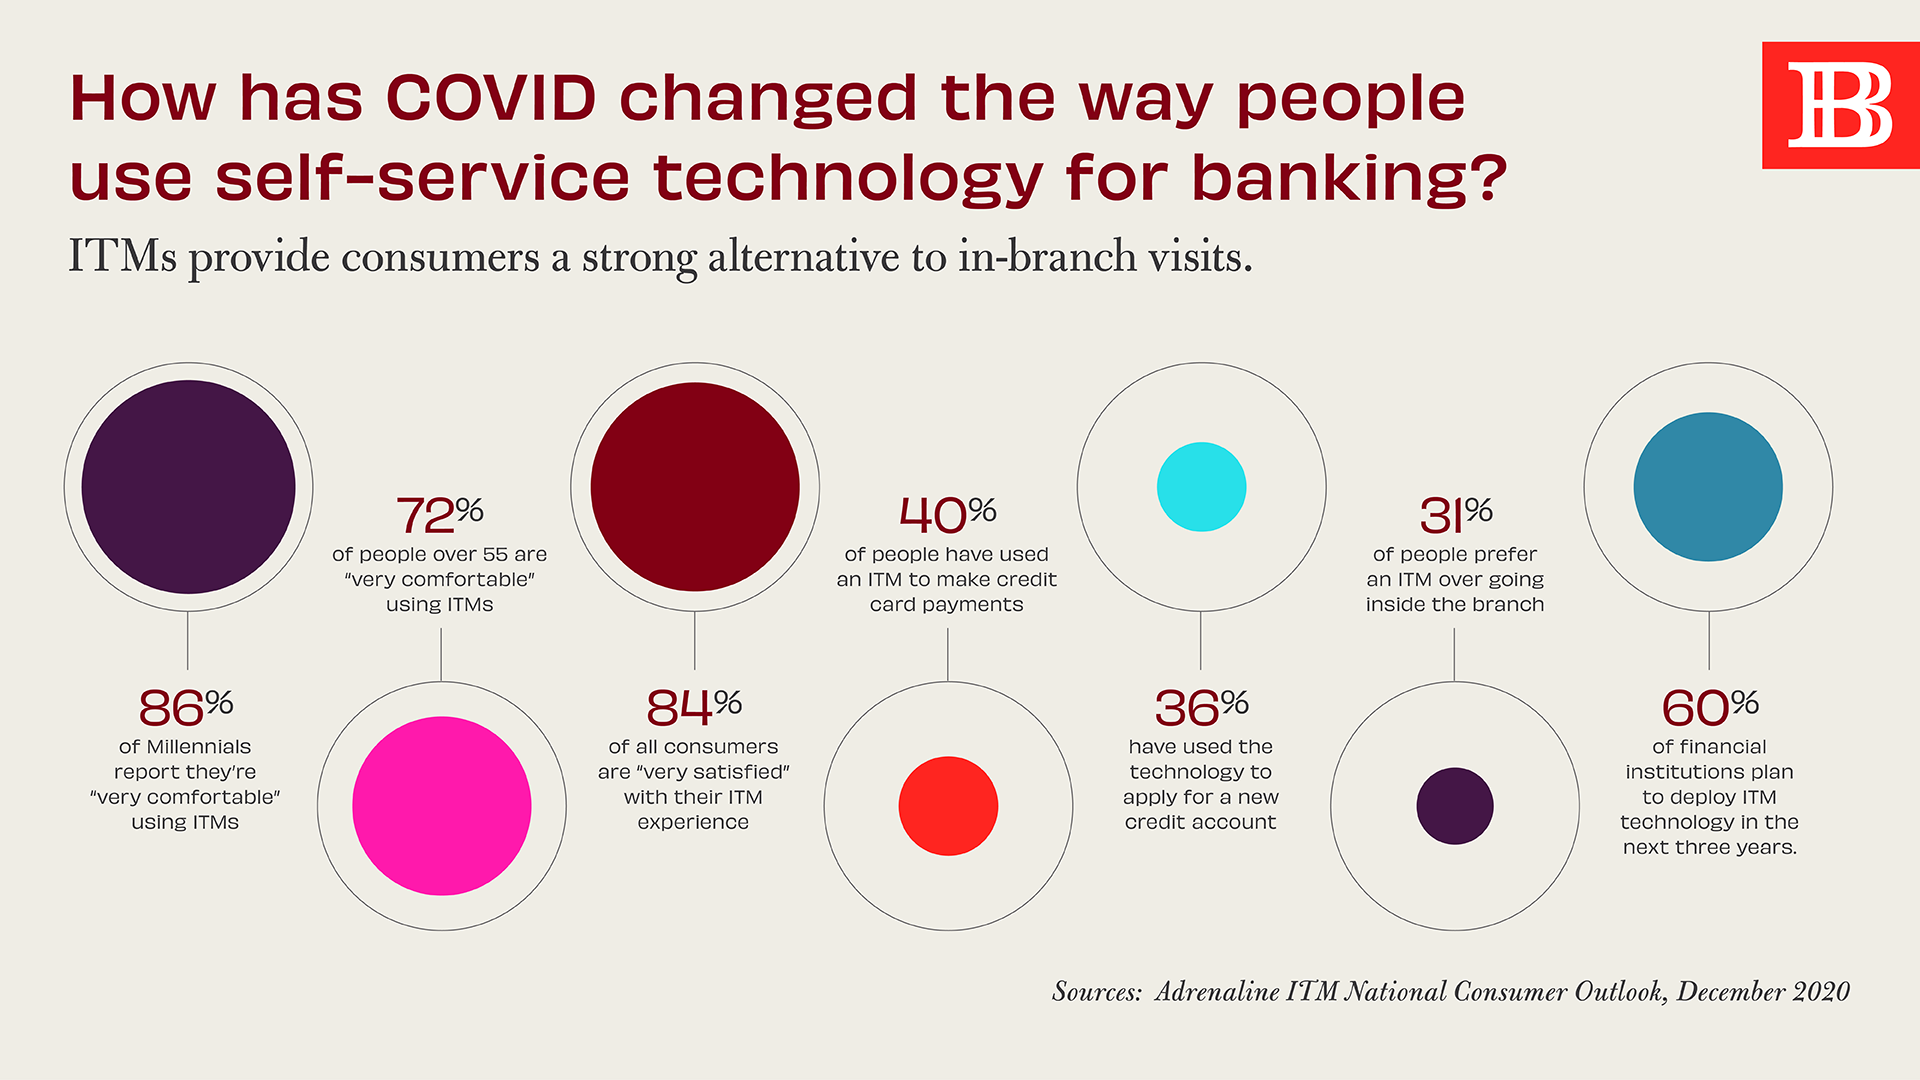 How has COVID changed the way people use self-service technology for banking?